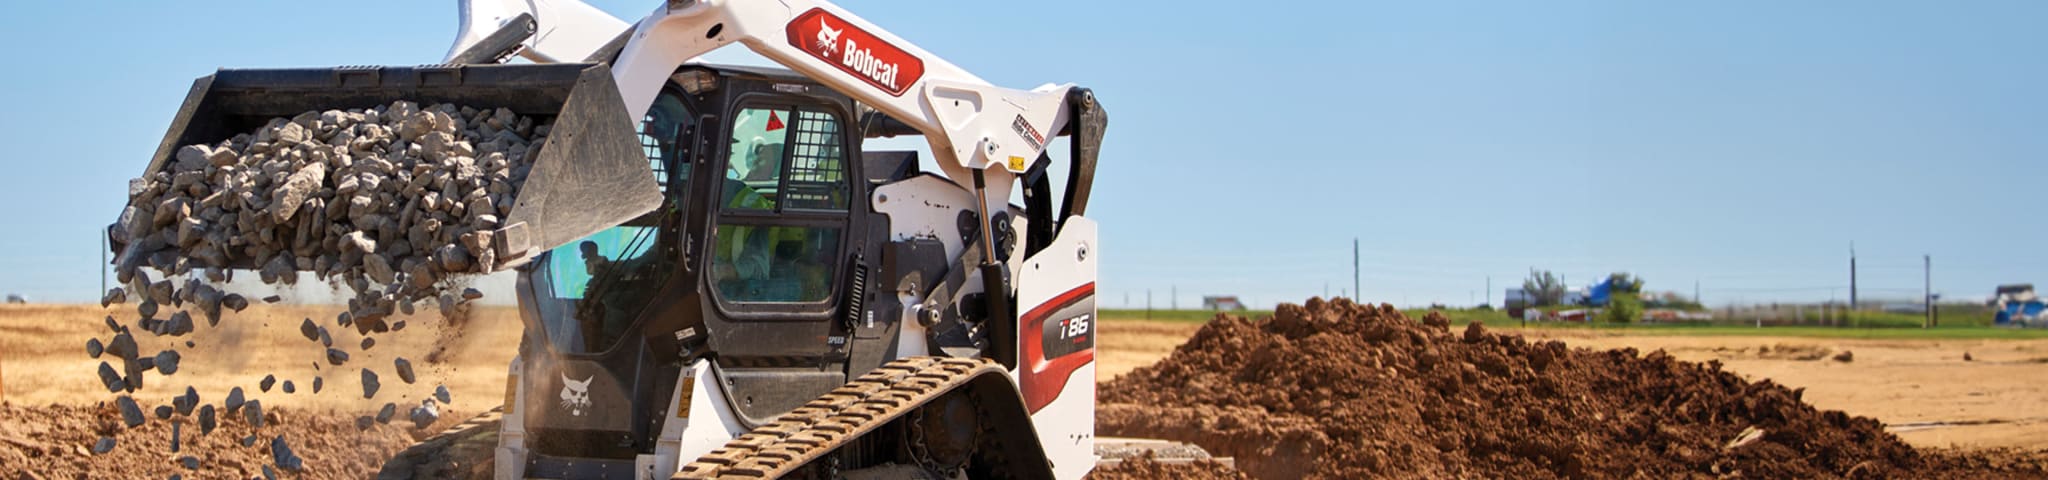 A Bobcat T86 Compact Track Loader Dumps a Bucketful of Rocks on a Construction Site 